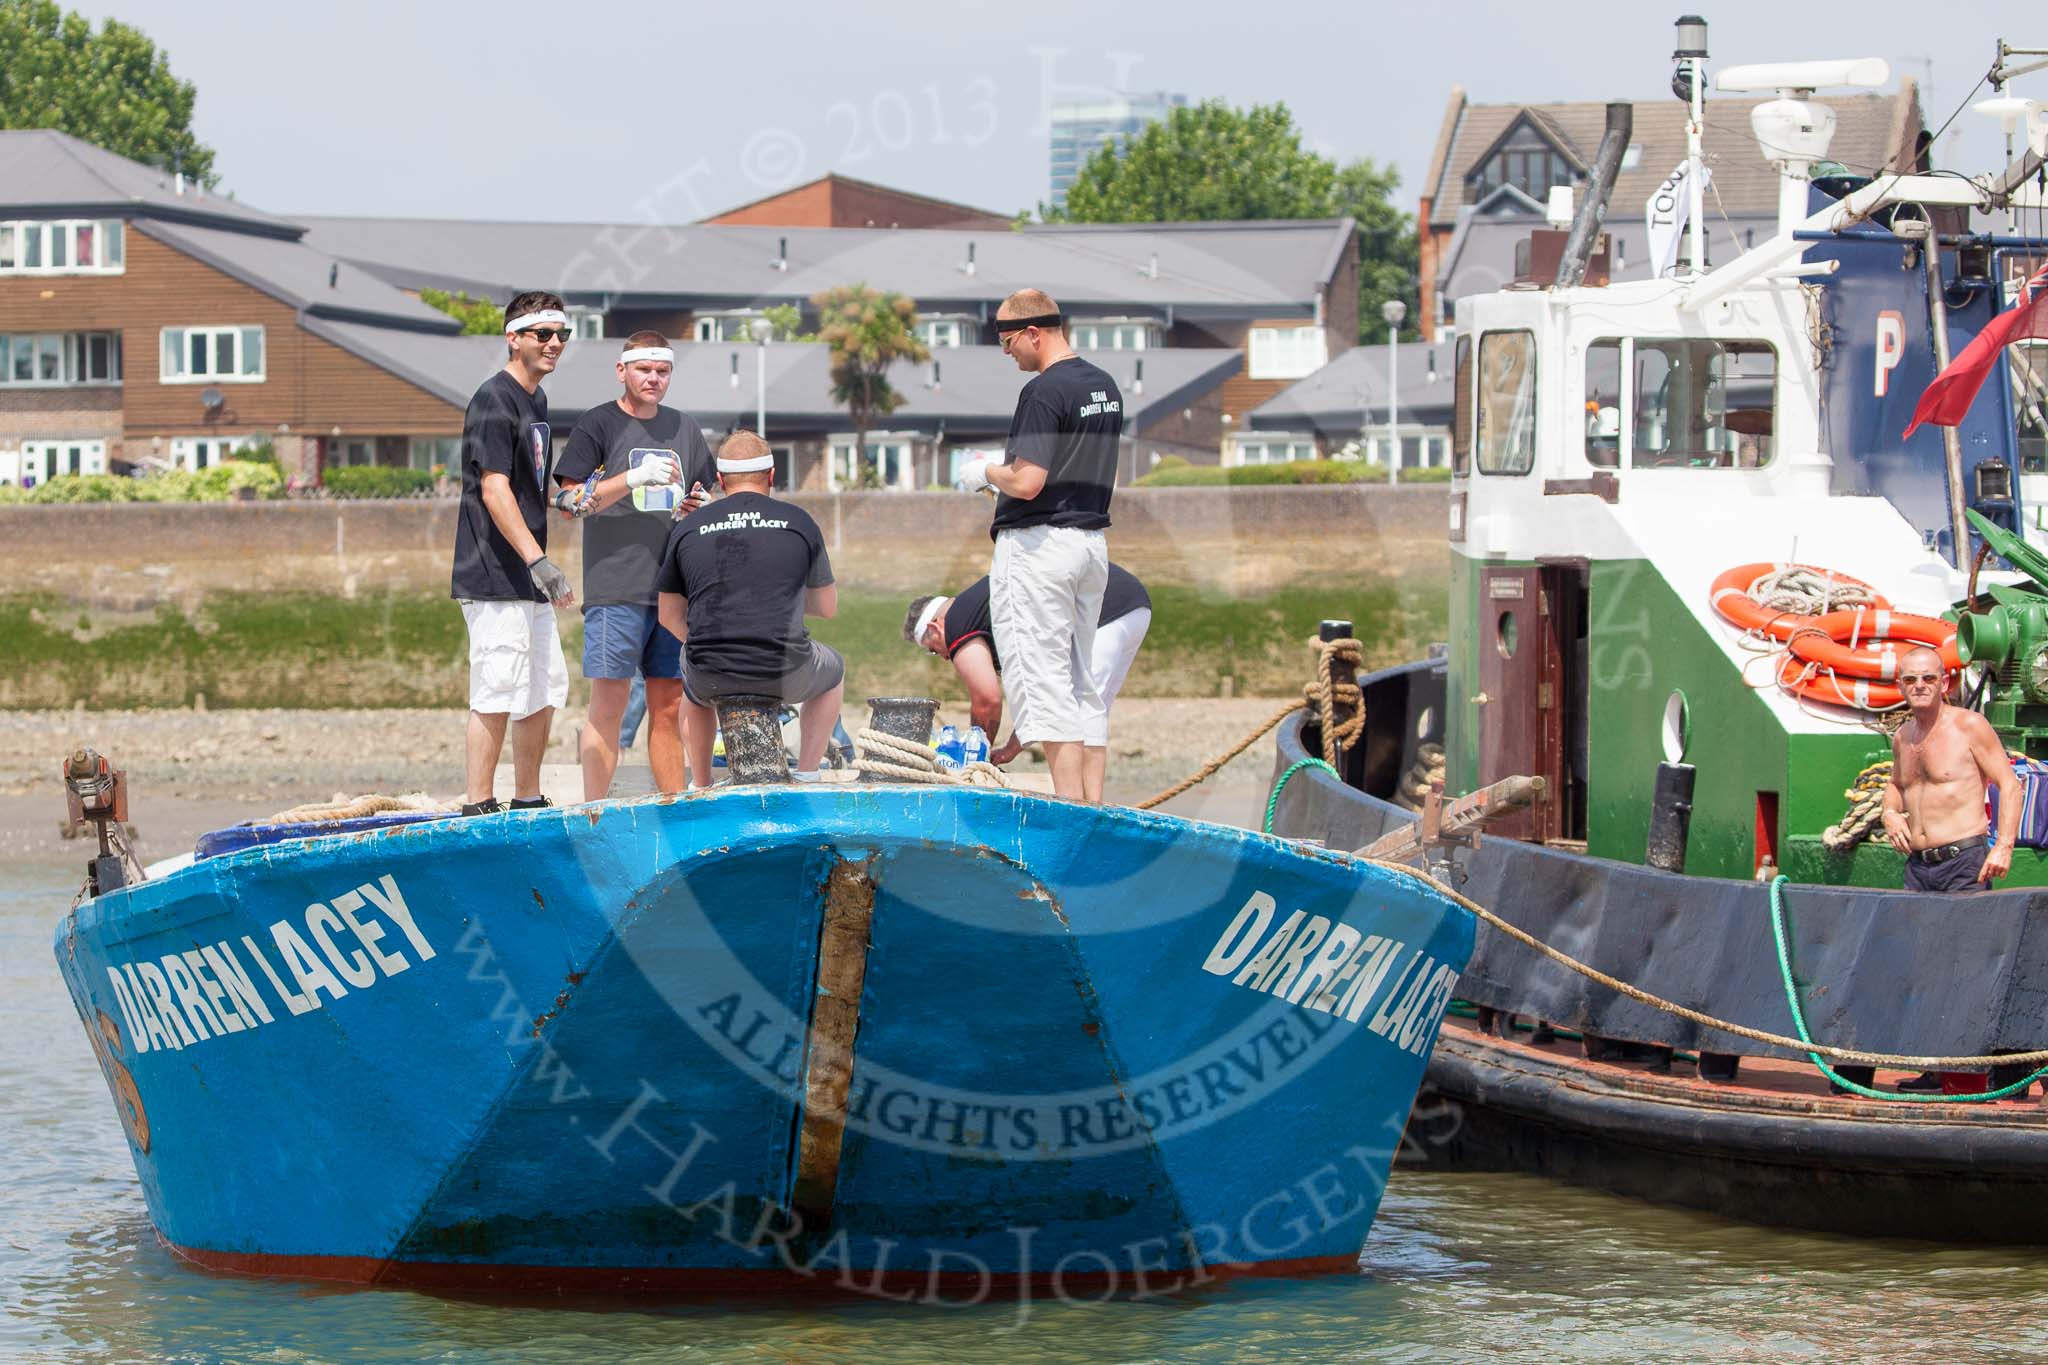 TOW River Thames Barge Driving Race 2013: The crew on board of barge  "Darren Lacey", by Princess Pocahontas,  before the start of the race. On the right tug "Horton"..
River Thames between Greenwich and Westminster,
London,

United Kingdom,
on 13 July 2013 at 12:22, image #69